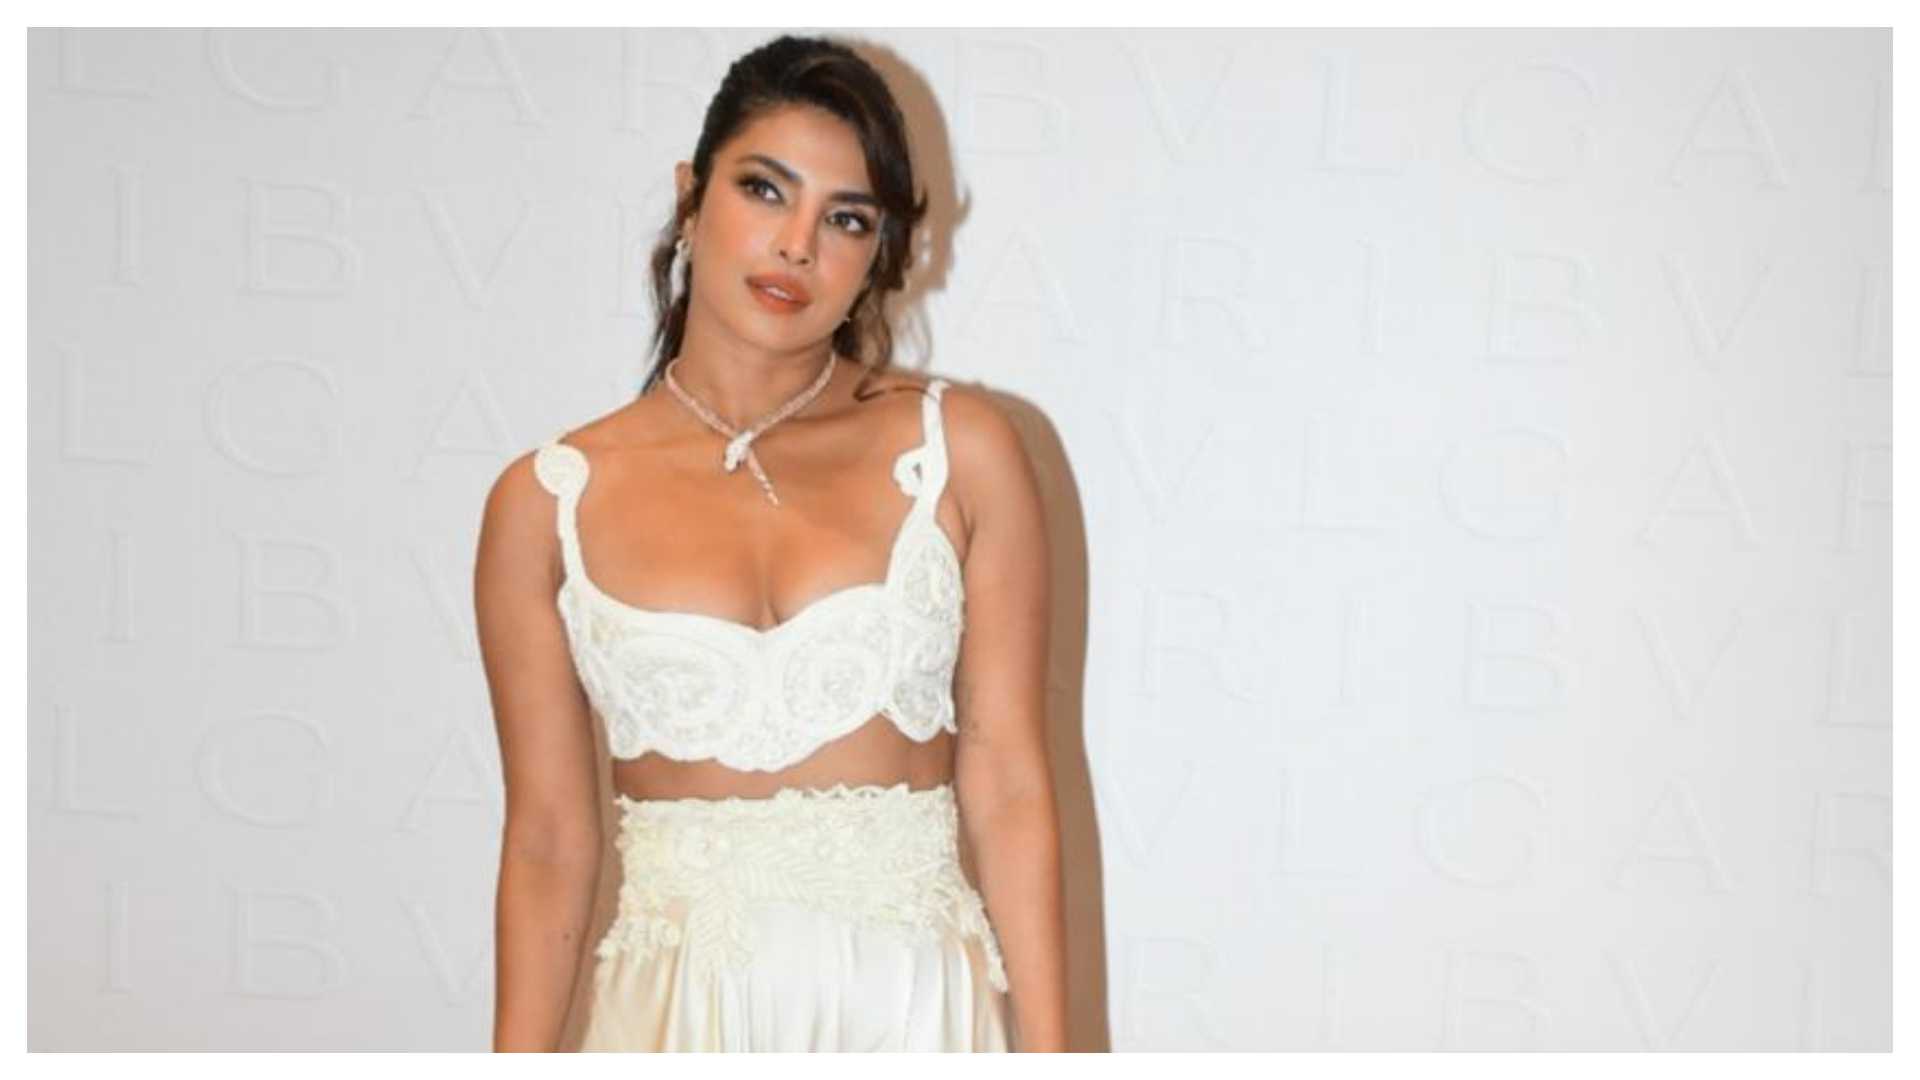 Priyanka Chopra makes heads turn in her ivory crop top and high ponytail, fans gush over her ‘next level aura’